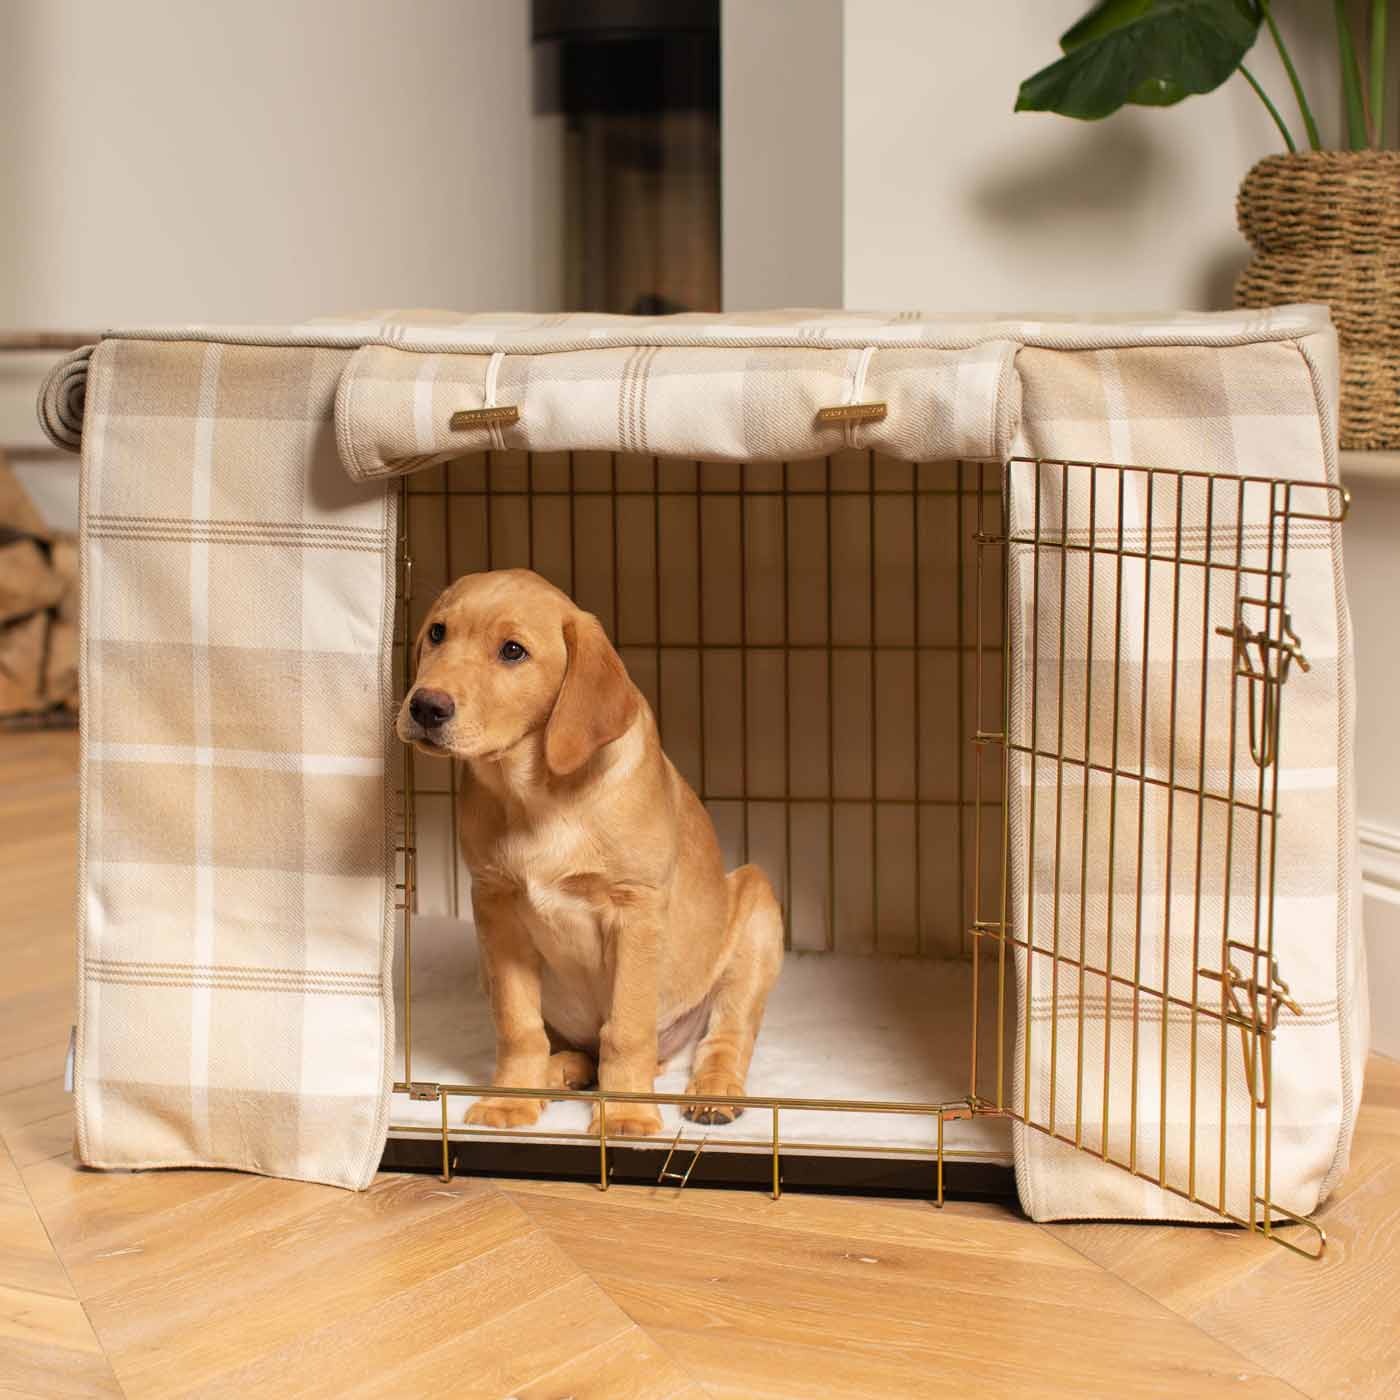 Discover Our Heavy-Duty Dog Crate With Natural Tweed Crate Cover The Perfect Crate Accessory For The Ultimate Pet Den. Available To Personalise Here at Lords & Labradors 